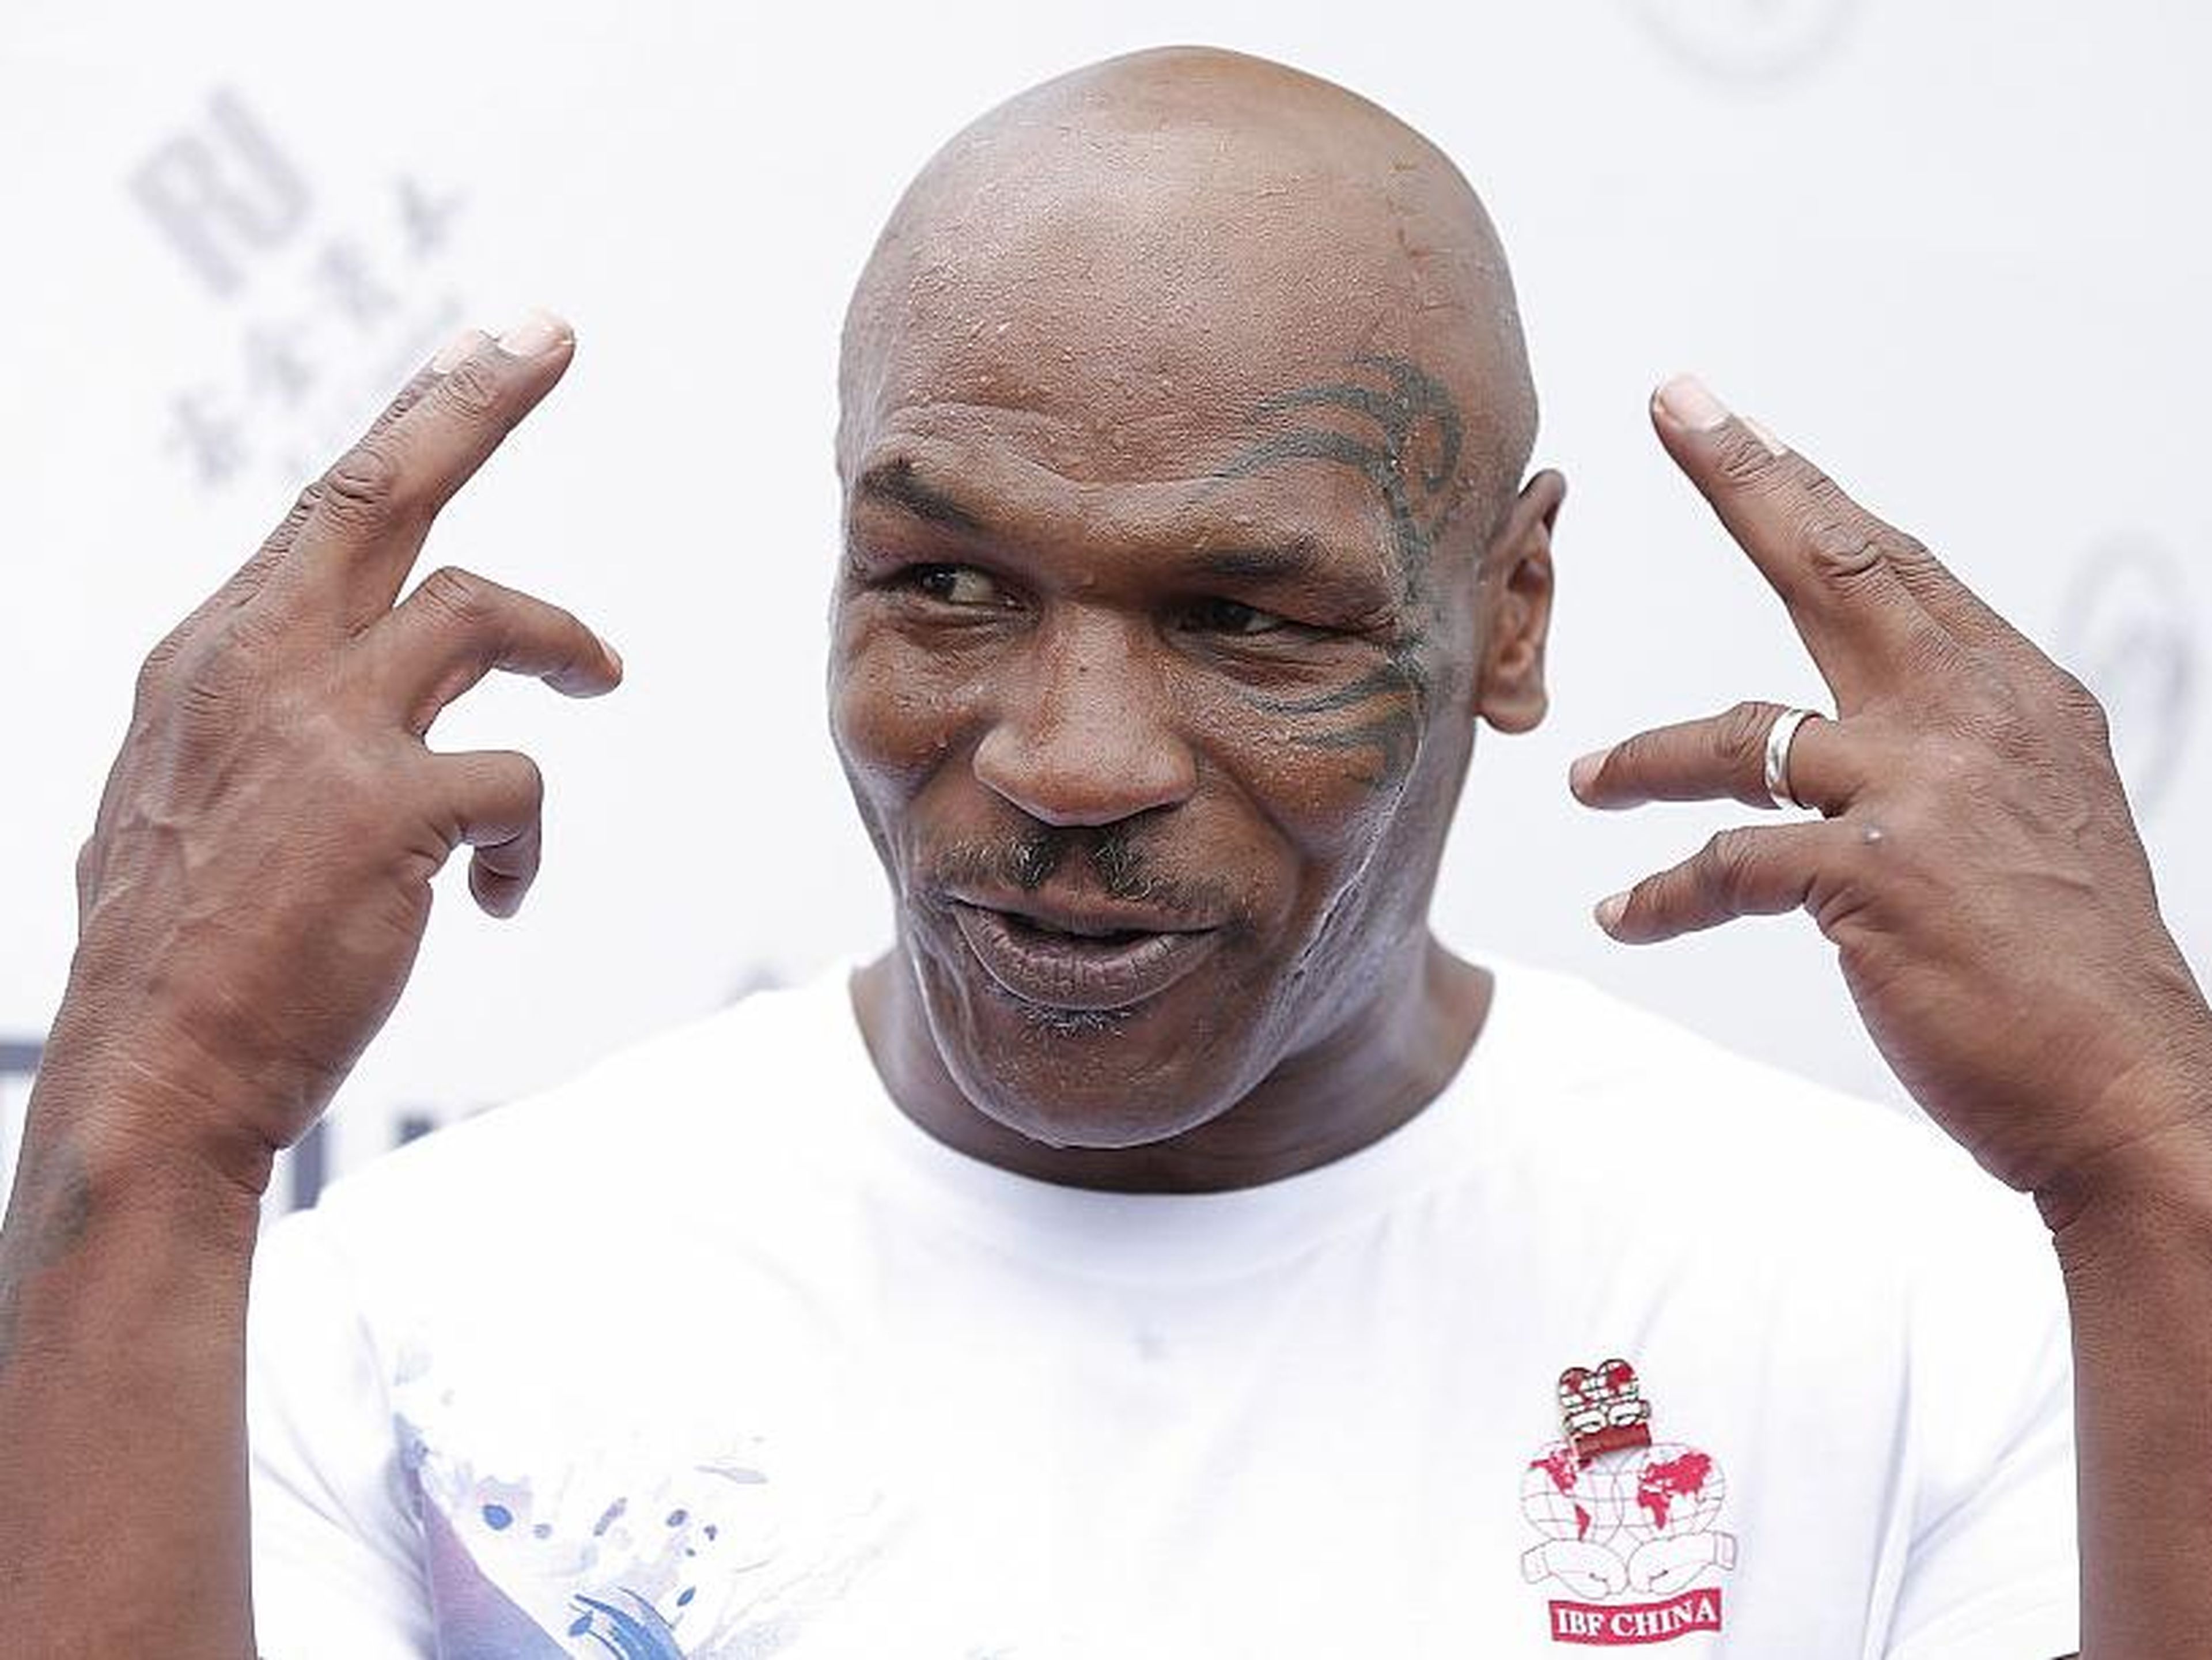 Former professional boxer Mike Tyson once bought a 24-karat gold bathtub for $2.2 million.